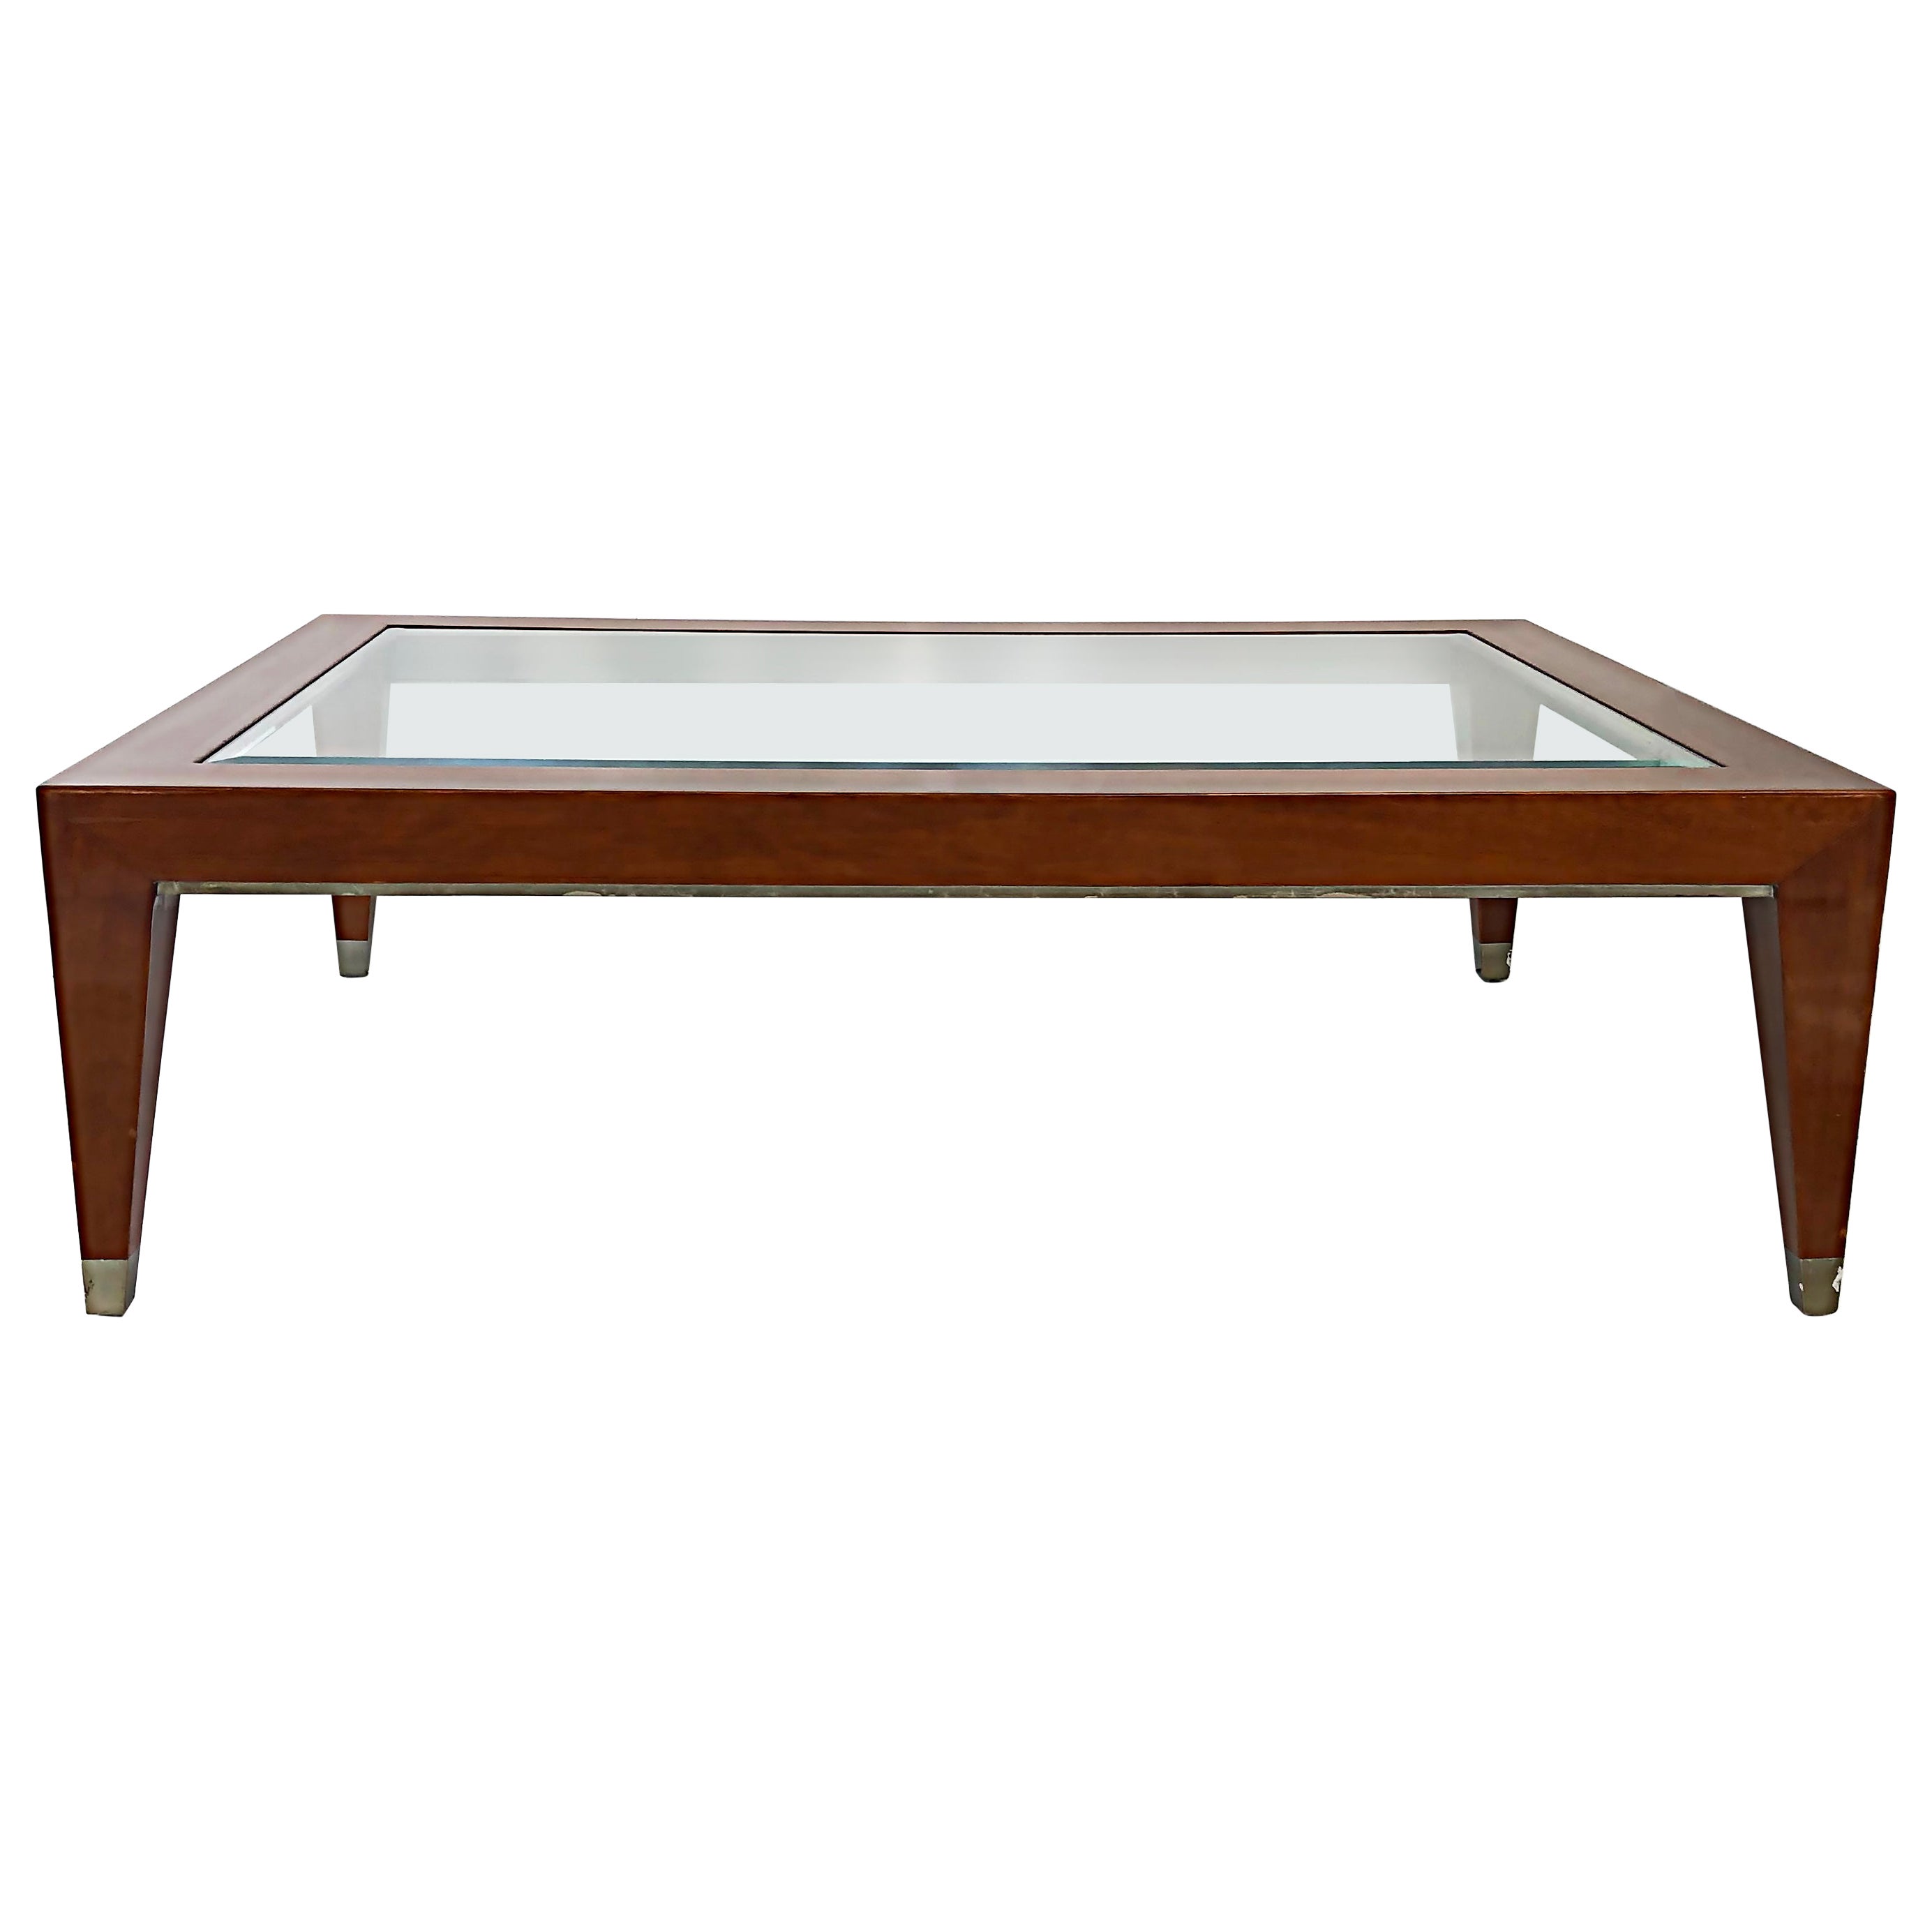 Vintage Enrique Garcel Mahogany Coffee Table with Inset Beveled Glass Top 